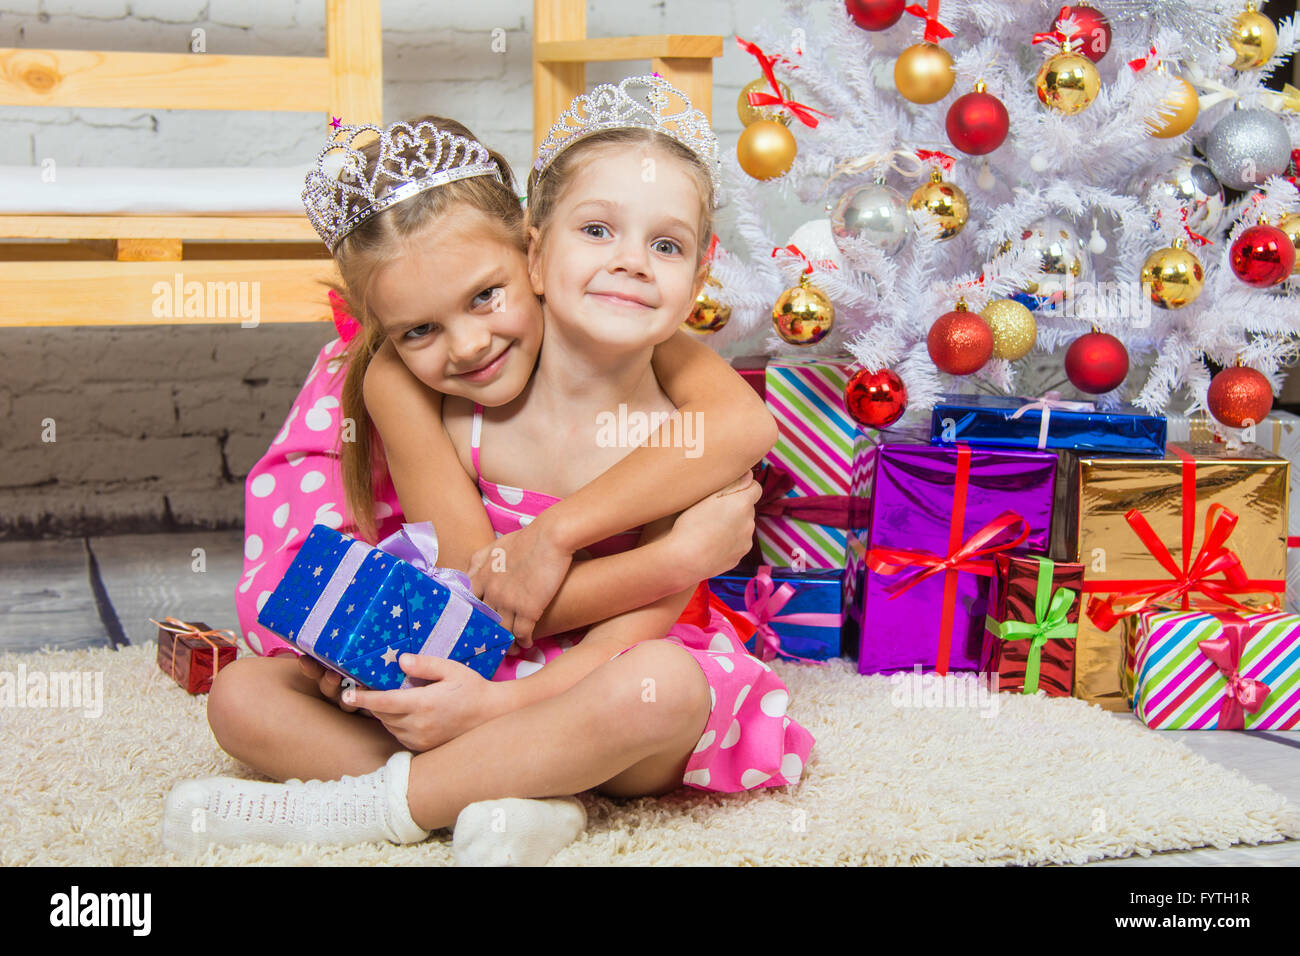 Girl hugging another girl sitting on a mat at the Christmas tree Stock Photo